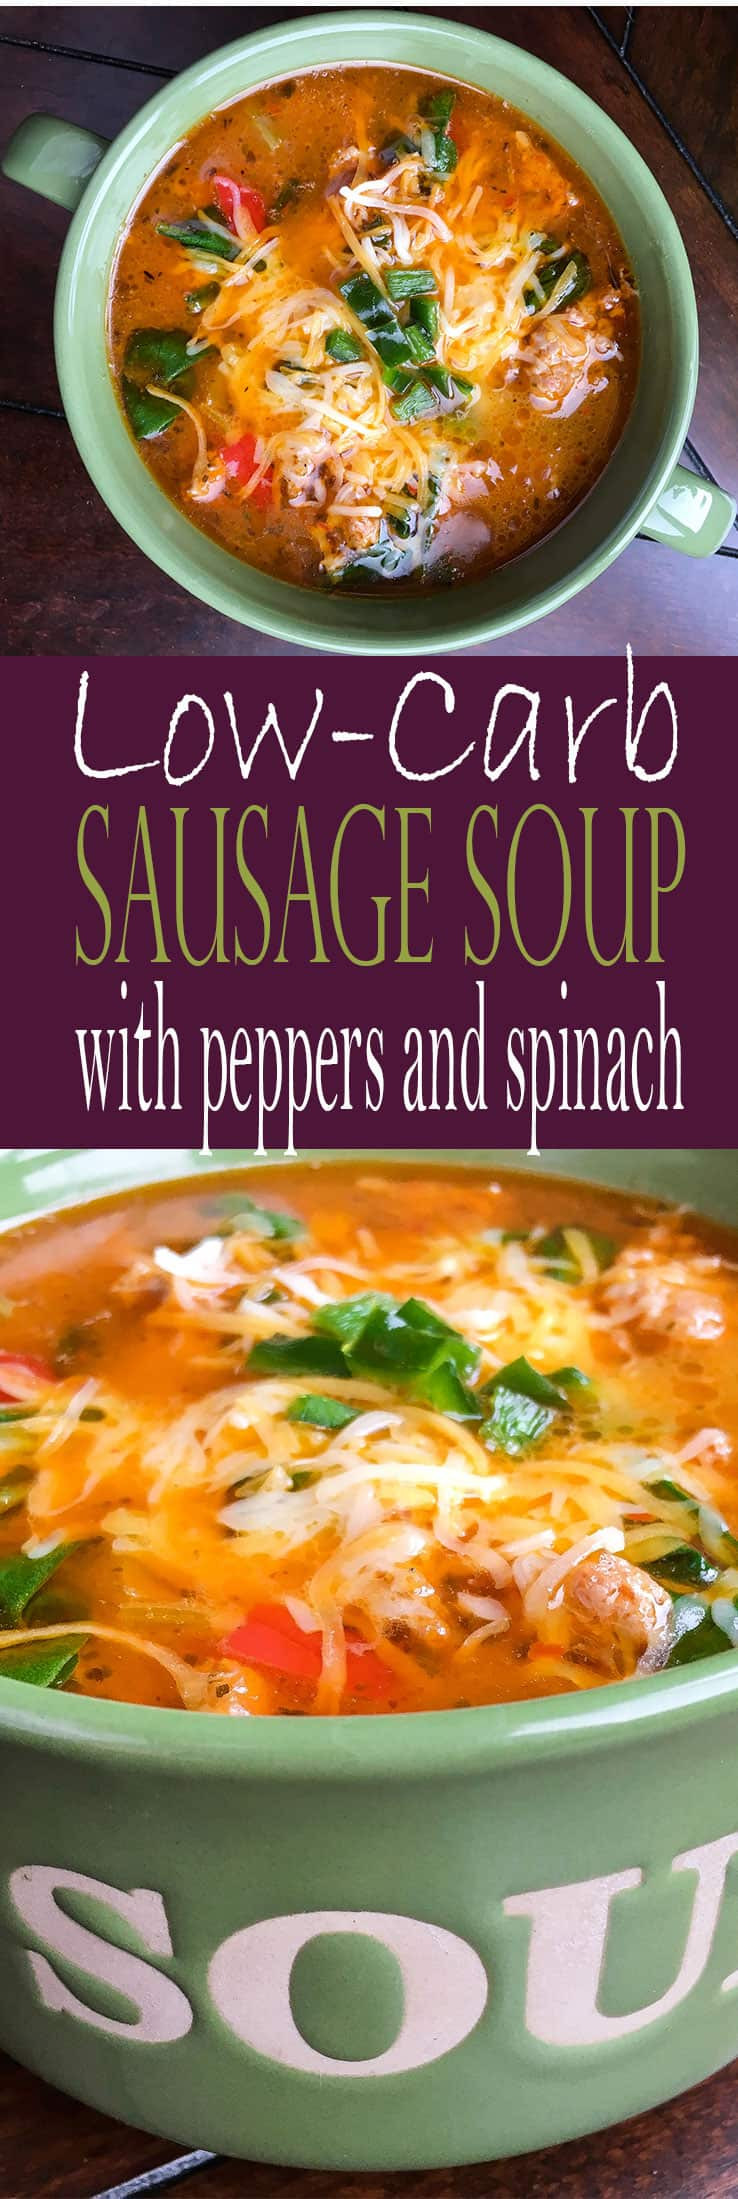 Easy Keto Soup Recipes
 Easy Keto Soup with Sausage Peppers and Spinach